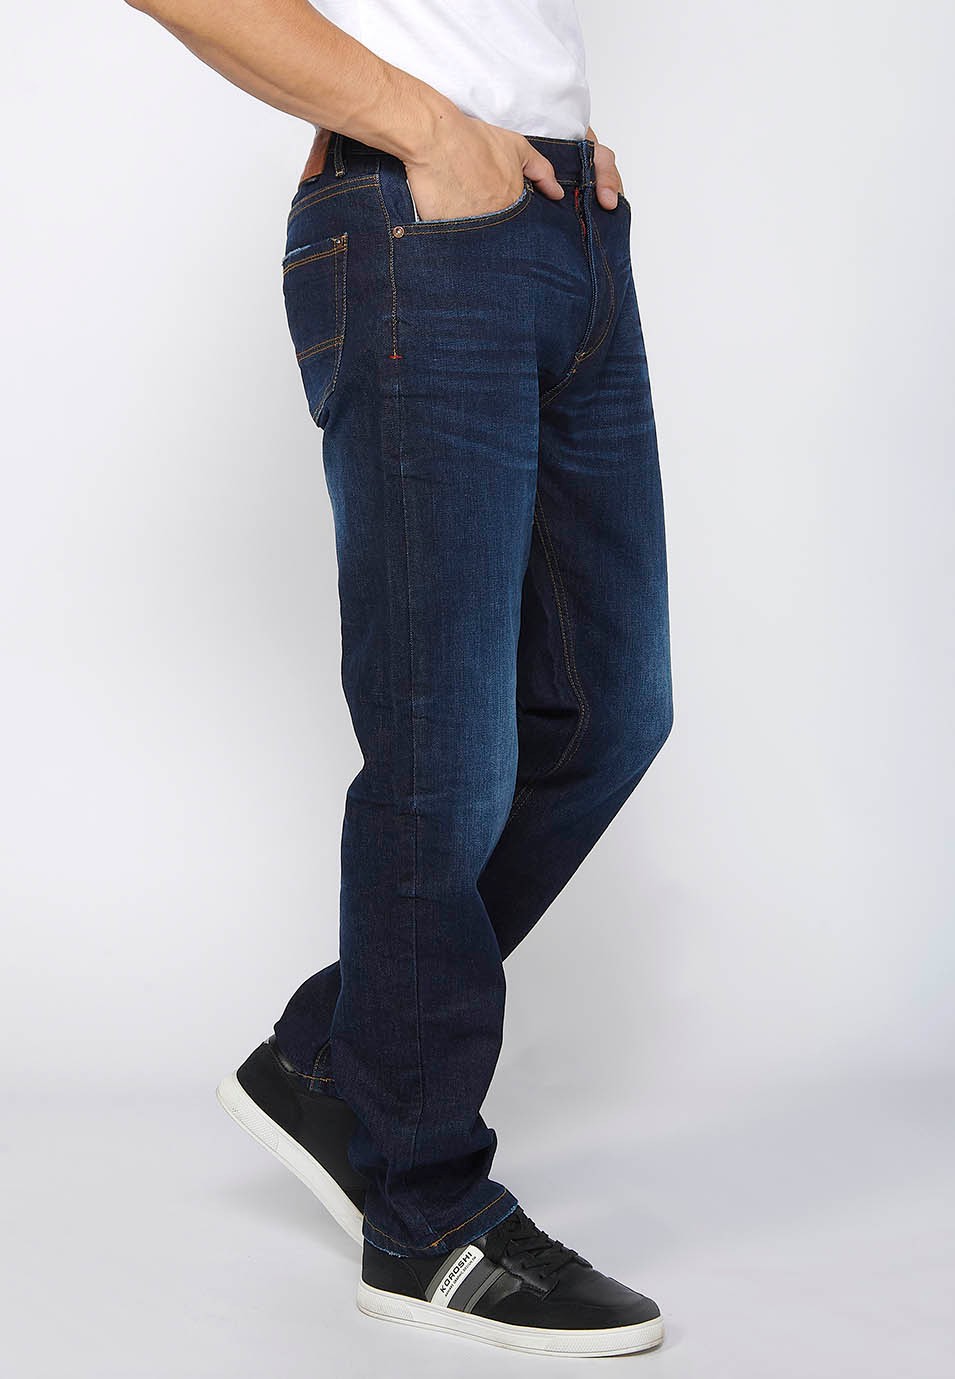 Comfort fit Straigth denim pants with zipper front closure in Blue for Men